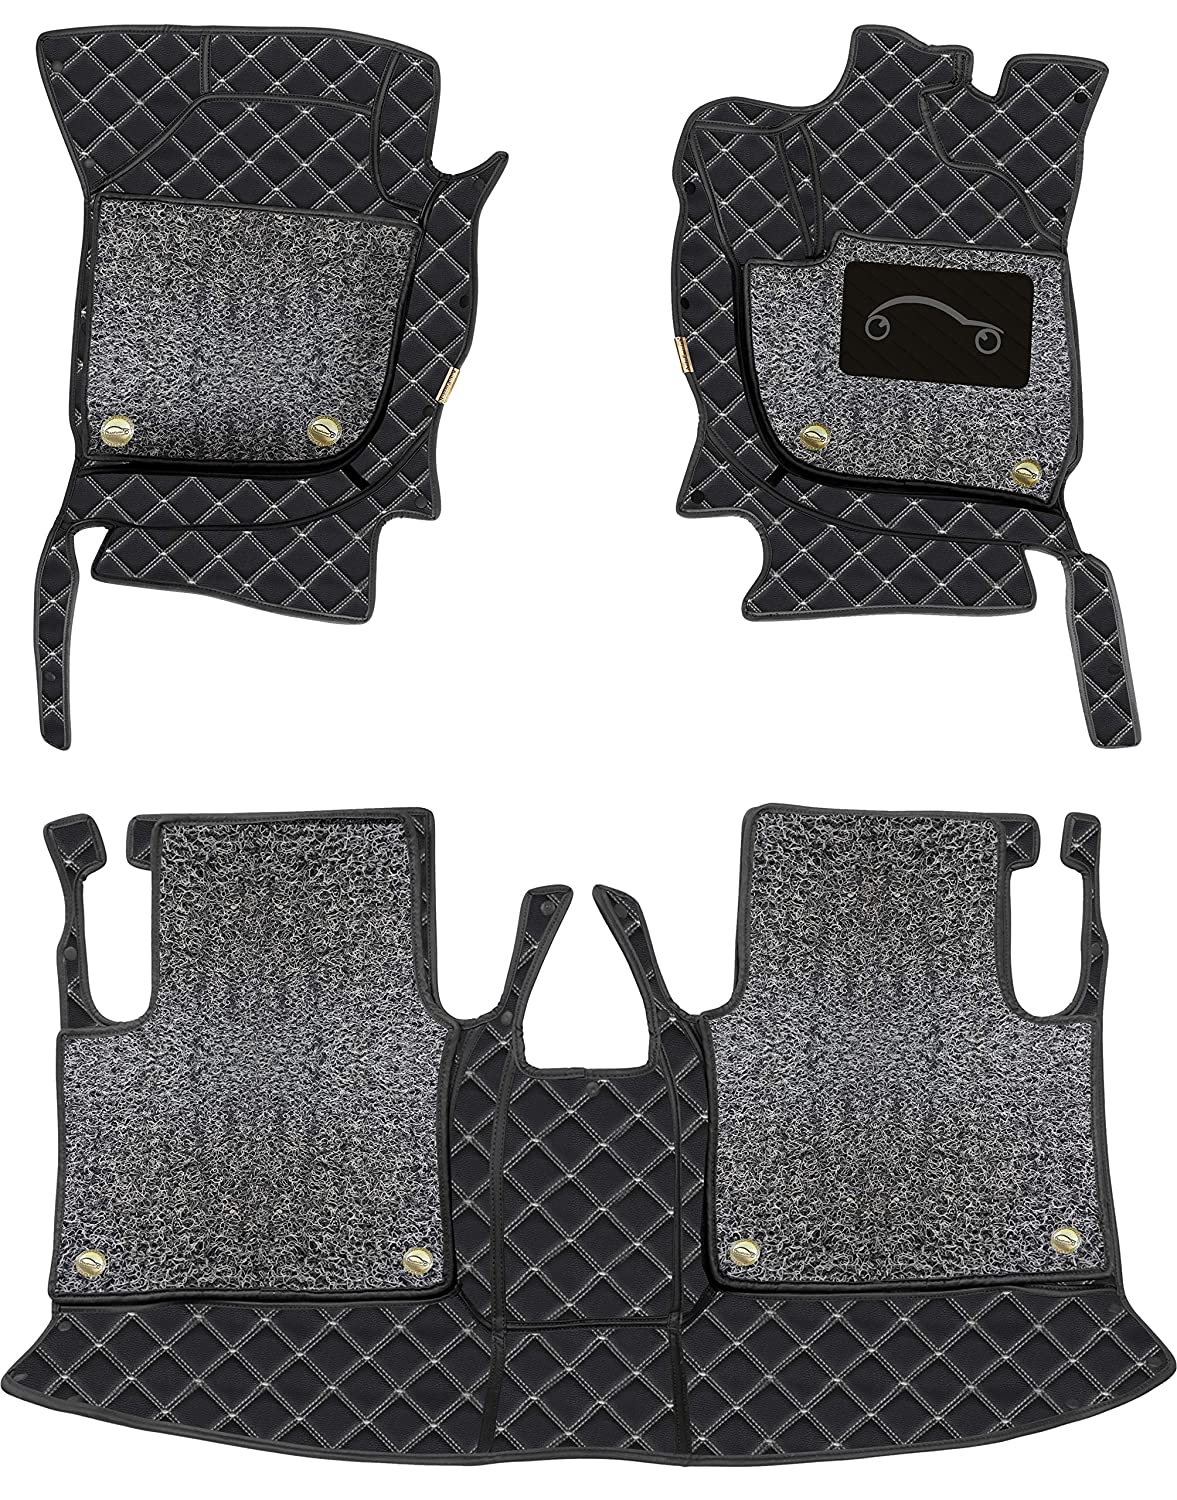 Renault Captur 2019 7D Luxury Car Mat, All Weather Proof, Anti-Skid, 100% Waterproof & Odorless with Unique Diamond Fish Design (24mm Luxury PU Leather, 2 Rows)